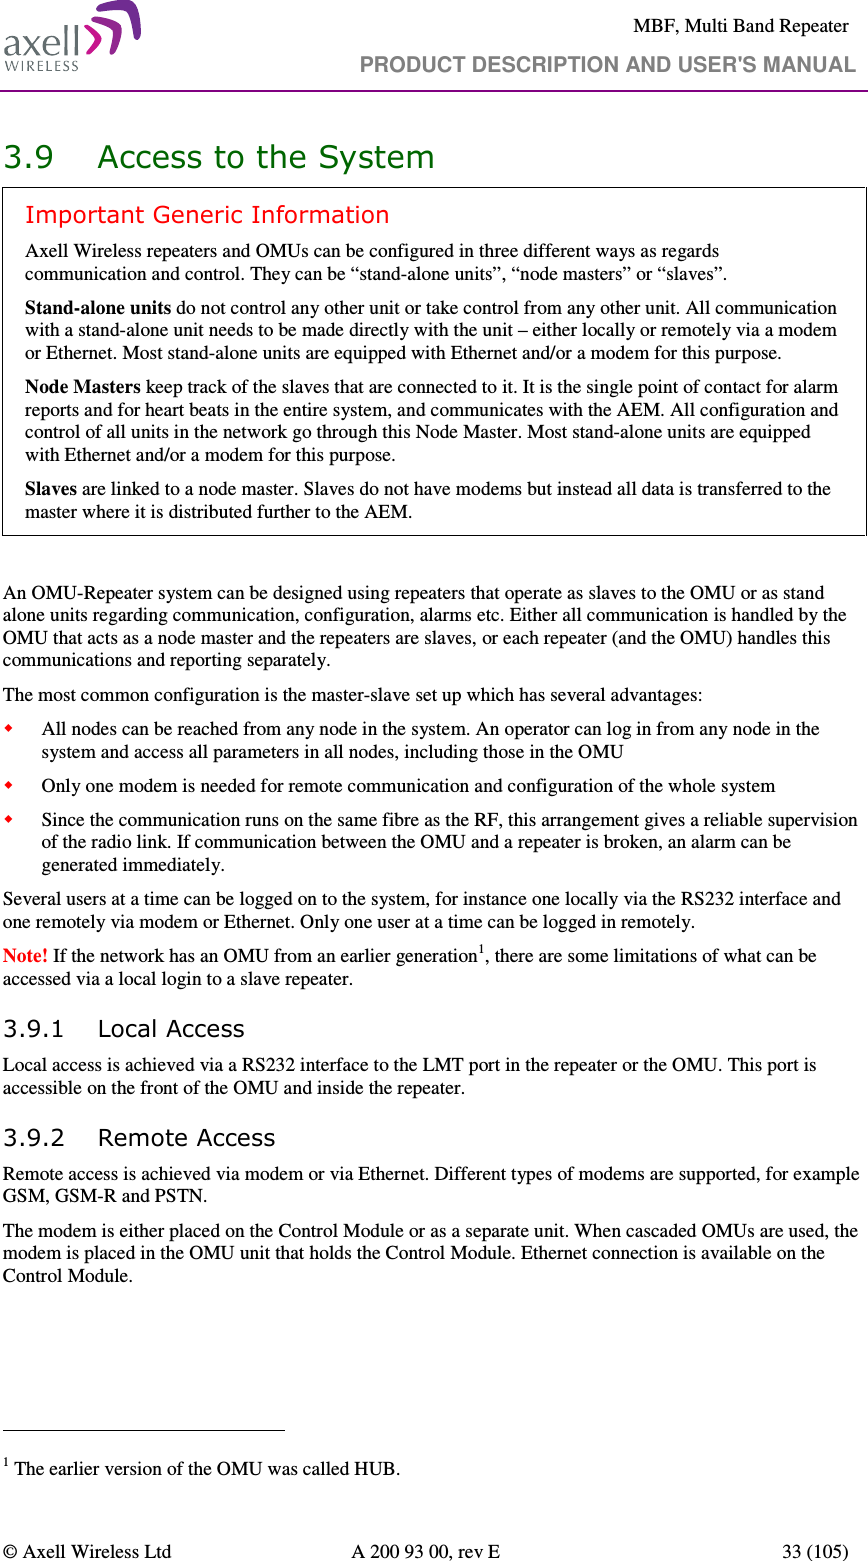     MBF, Multi Band Repeater                                     PRODUCT DESCRIPTION AND USER&apos;S MANUAL   © Axell Wireless Ltd  A 200 93 00, rev E  33 (105)  3.9 Access to the System Important Generic Information Axell Wireless repeaters and OMUs can be configured in three different ways as regards communication and control. They can be “stand-alone units”, “node masters” or “slaves”. Stand-alone units do not control any other unit or take control from any other unit. All communication with a stand-alone unit needs to be made directly with the unit – either locally or remotely via a modem or Ethernet. Most stand-alone units are equipped with Ethernet and/or a modem for this purpose. Node Masters keep track of the slaves that are connected to it. It is the single point of contact for alarm reports and for heart beats in the entire system, and communicates with the AEM. All configuration and control of all units in the network go through this Node Master. Most stand-alone units are equipped with Ethernet and/or a modem for this purpose. Slaves are linked to a node master. Slaves do not have modems but instead all data is transferred to the master where it is distributed further to the AEM.   An OMU-Repeater system can be designed using repeaters that operate as slaves to the OMU or as stand alone units regarding communication, configuration, alarms etc. Either all communication is handled by the OMU that acts as a node master and the repeaters are slaves, or each repeater (and the OMU) handles this communications and reporting separately.  The most common configuration is the master-slave set up which has several advantages:  All nodes can be reached from any node in the system. An operator can log in from any node in the system and access all parameters in all nodes, including those in the OMU  Only one modem is needed for remote communication and configuration of the whole system  Since the communication runs on the same fibre as the RF, this arrangement gives a reliable supervision of the radio link. If communication between the OMU and a repeater is broken, an alarm can be generated immediately. Several users at a time can be logged on to the system, for instance one locally via the RS232 interface and one remotely via modem or Ethernet. Only one user at a time can be logged in remotely. Note! If the network has an OMU from an earlier generation1, there are some limitations of what can be accessed via a local login to a slave repeater. 3.9.1 Local Access Local access is achieved via a RS232 interface to the LMT port in the repeater or the OMU. This port is accessible on the front of the OMU and inside the repeater.  3.9.2 Remote Access Remote access is achieved via modem or via Ethernet. Different types of modems are supported, for example GSM, GSM-R and PSTN.  The modem is either placed on the Control Module or as a separate unit. When cascaded OMUs are used, the modem is placed in the OMU unit that holds the Control Module. Ethernet connection is available on the Control Module.                                                            1 The earlier version of the OMU was called HUB. 